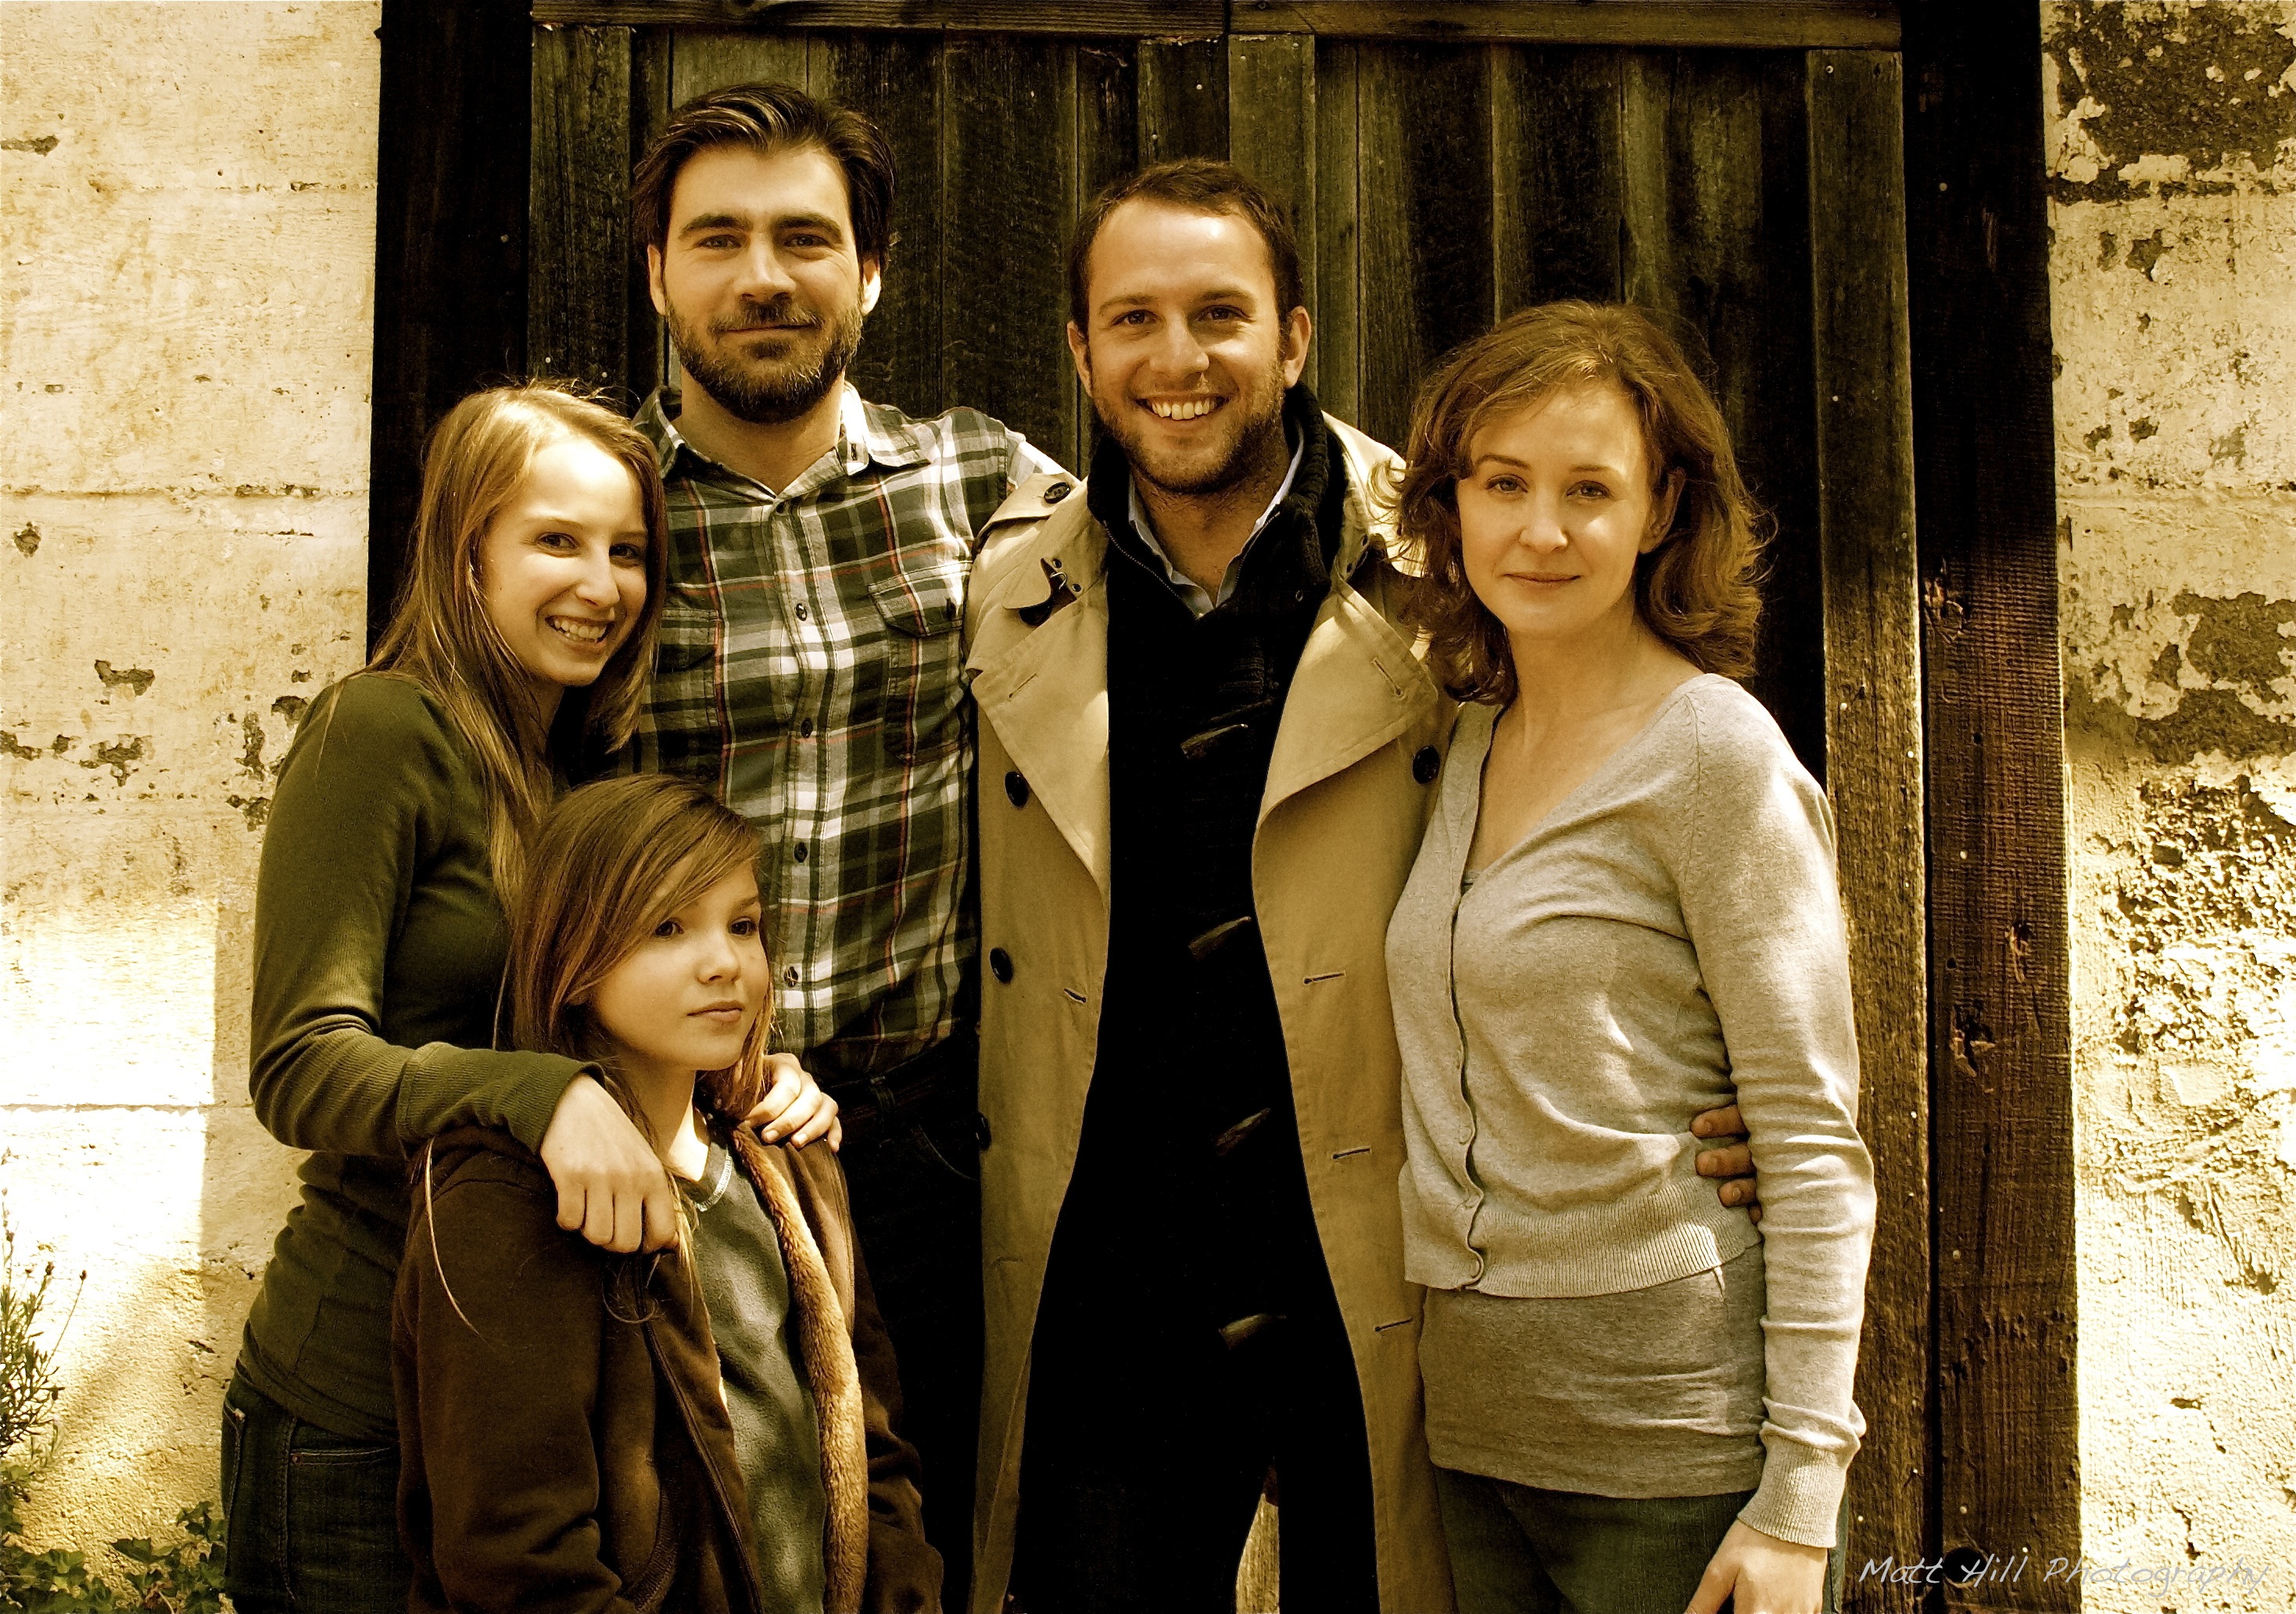 The cast of Harmony - Sarah Bowles, Abby Woodcock, Michael A. Newcomer, and Emily Dykes - with Pierre-Emmanuel Plassart